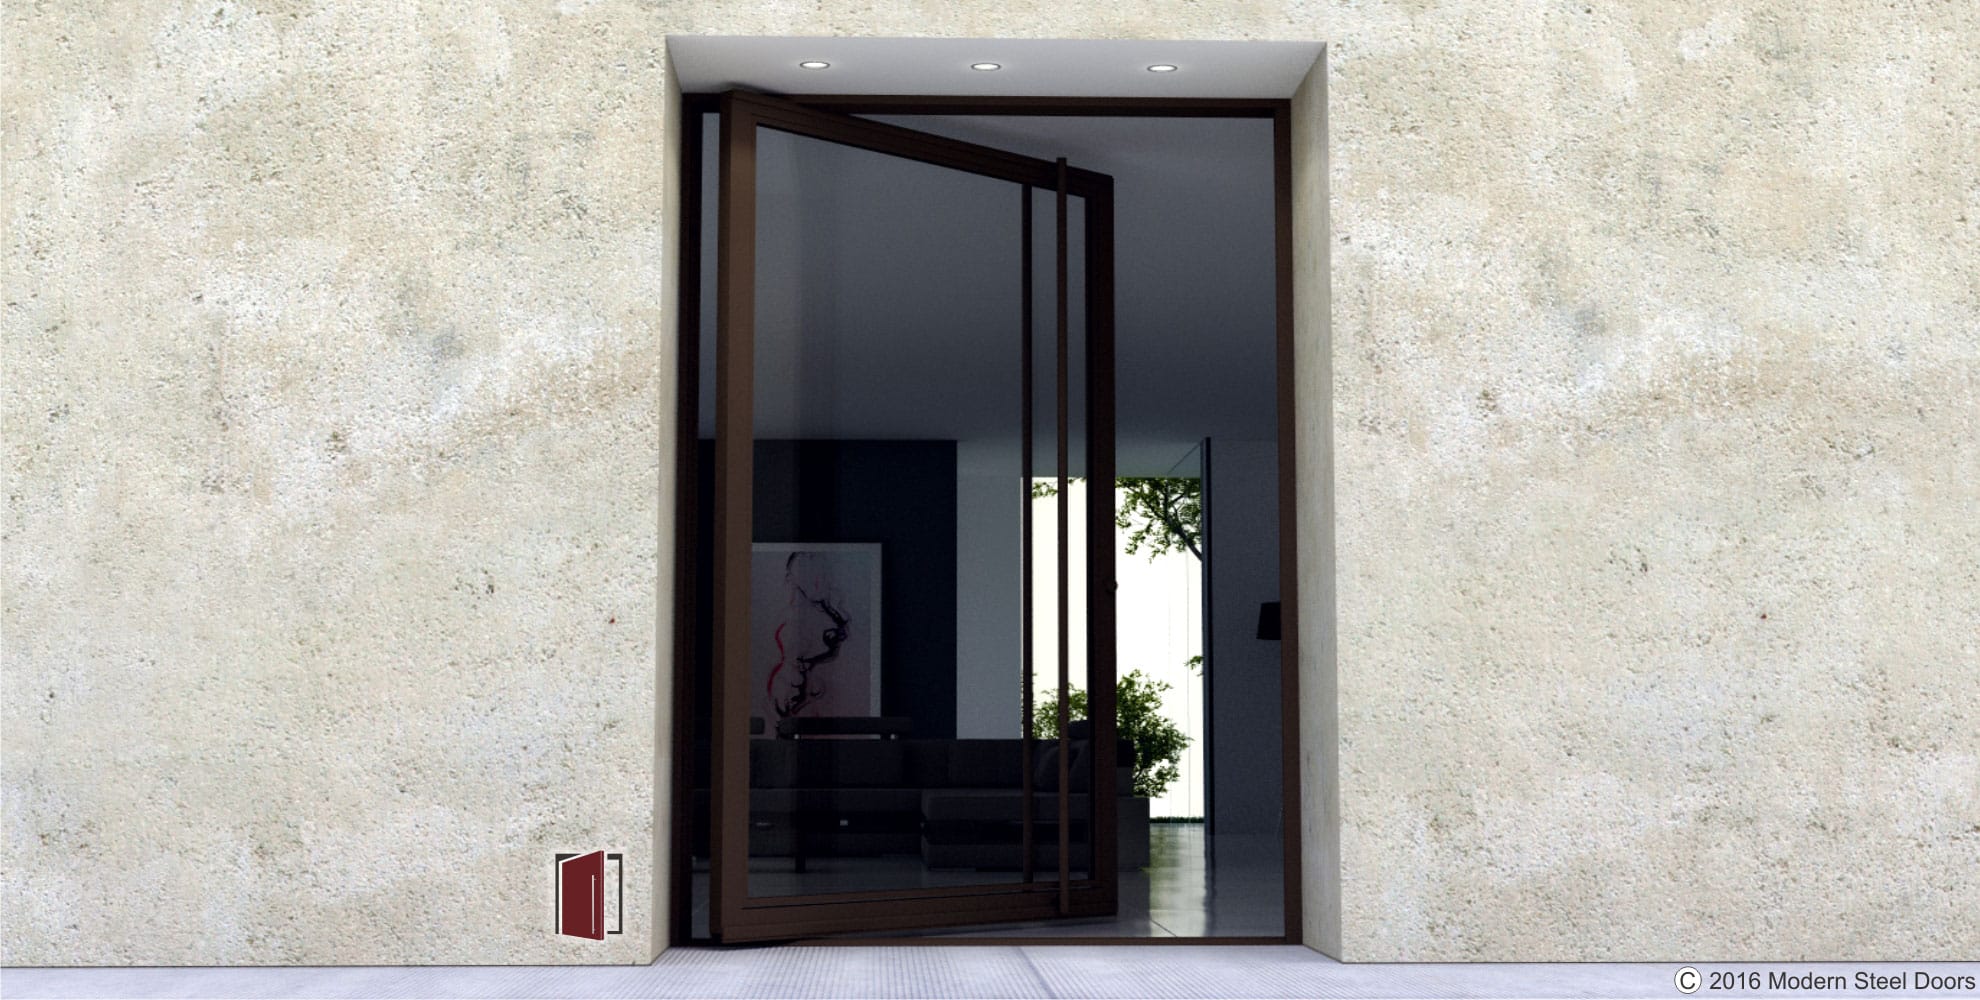 contemporary new front door for modern home made of glass and bronze steel with matching long round door handles